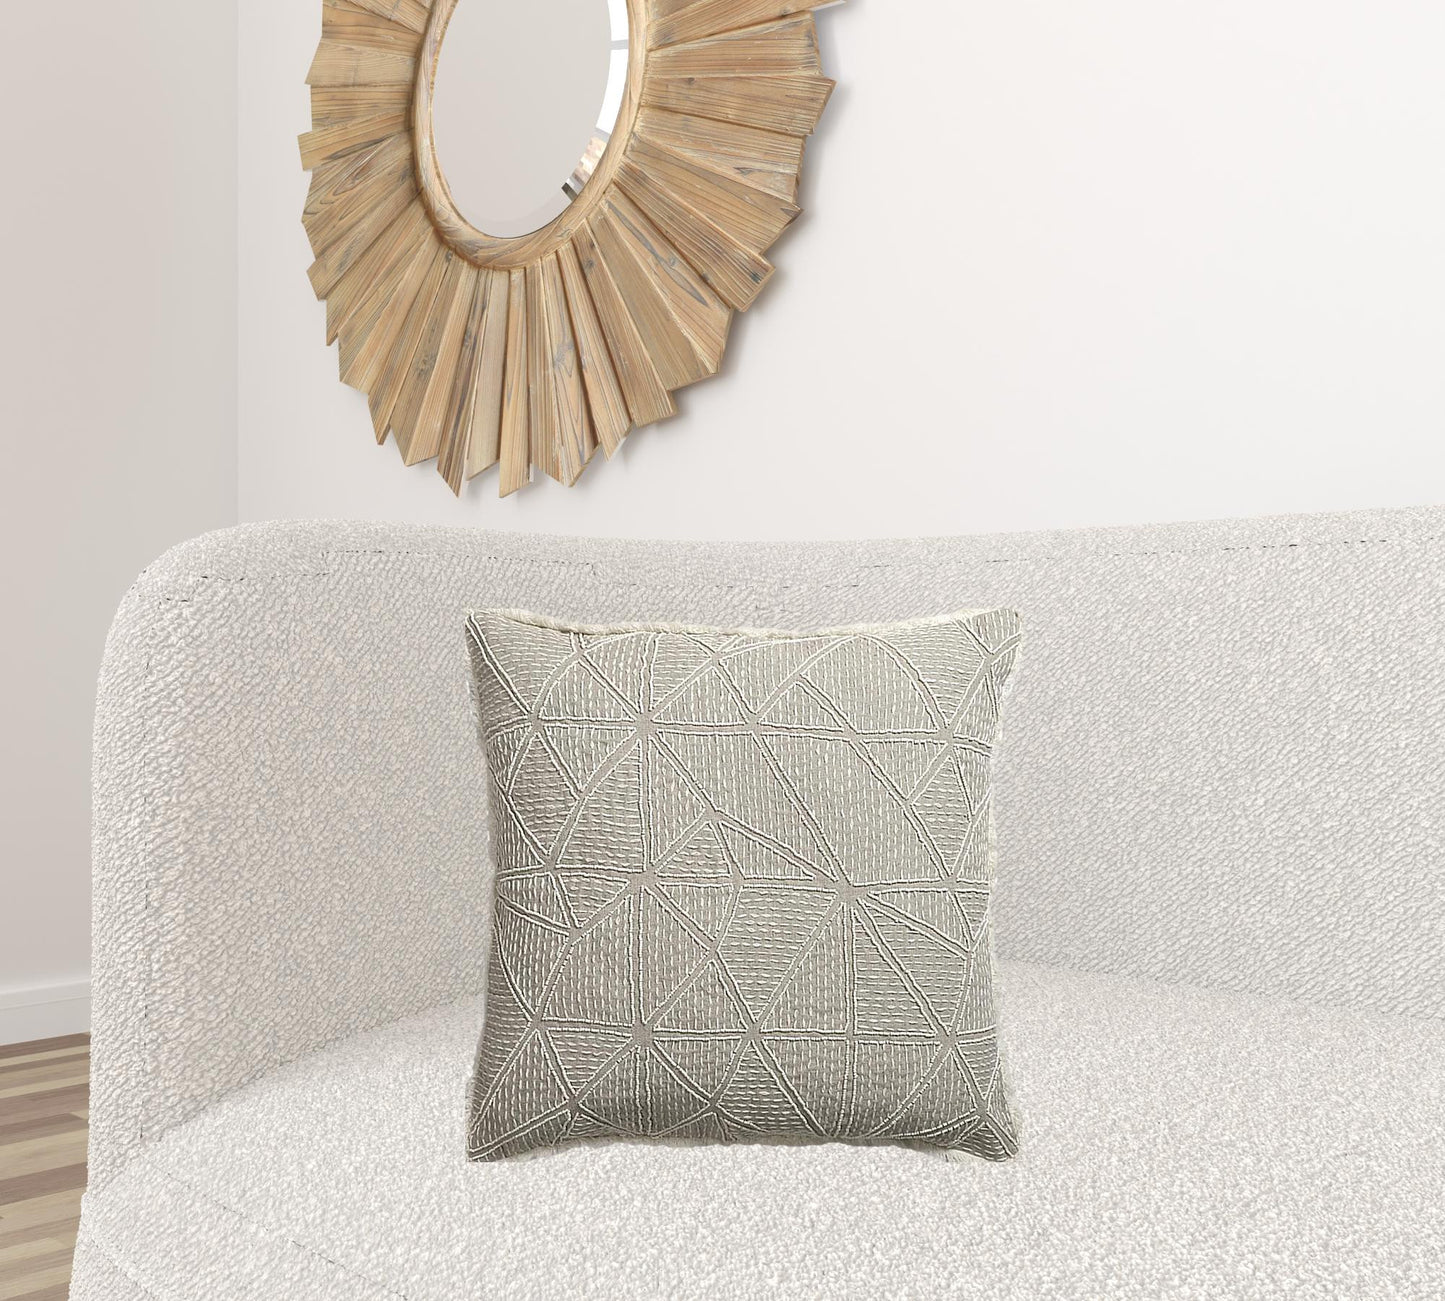 20" X 20" Beige and Ivory Geometric Linen Zippered Pillow With Embroidery, Fringe